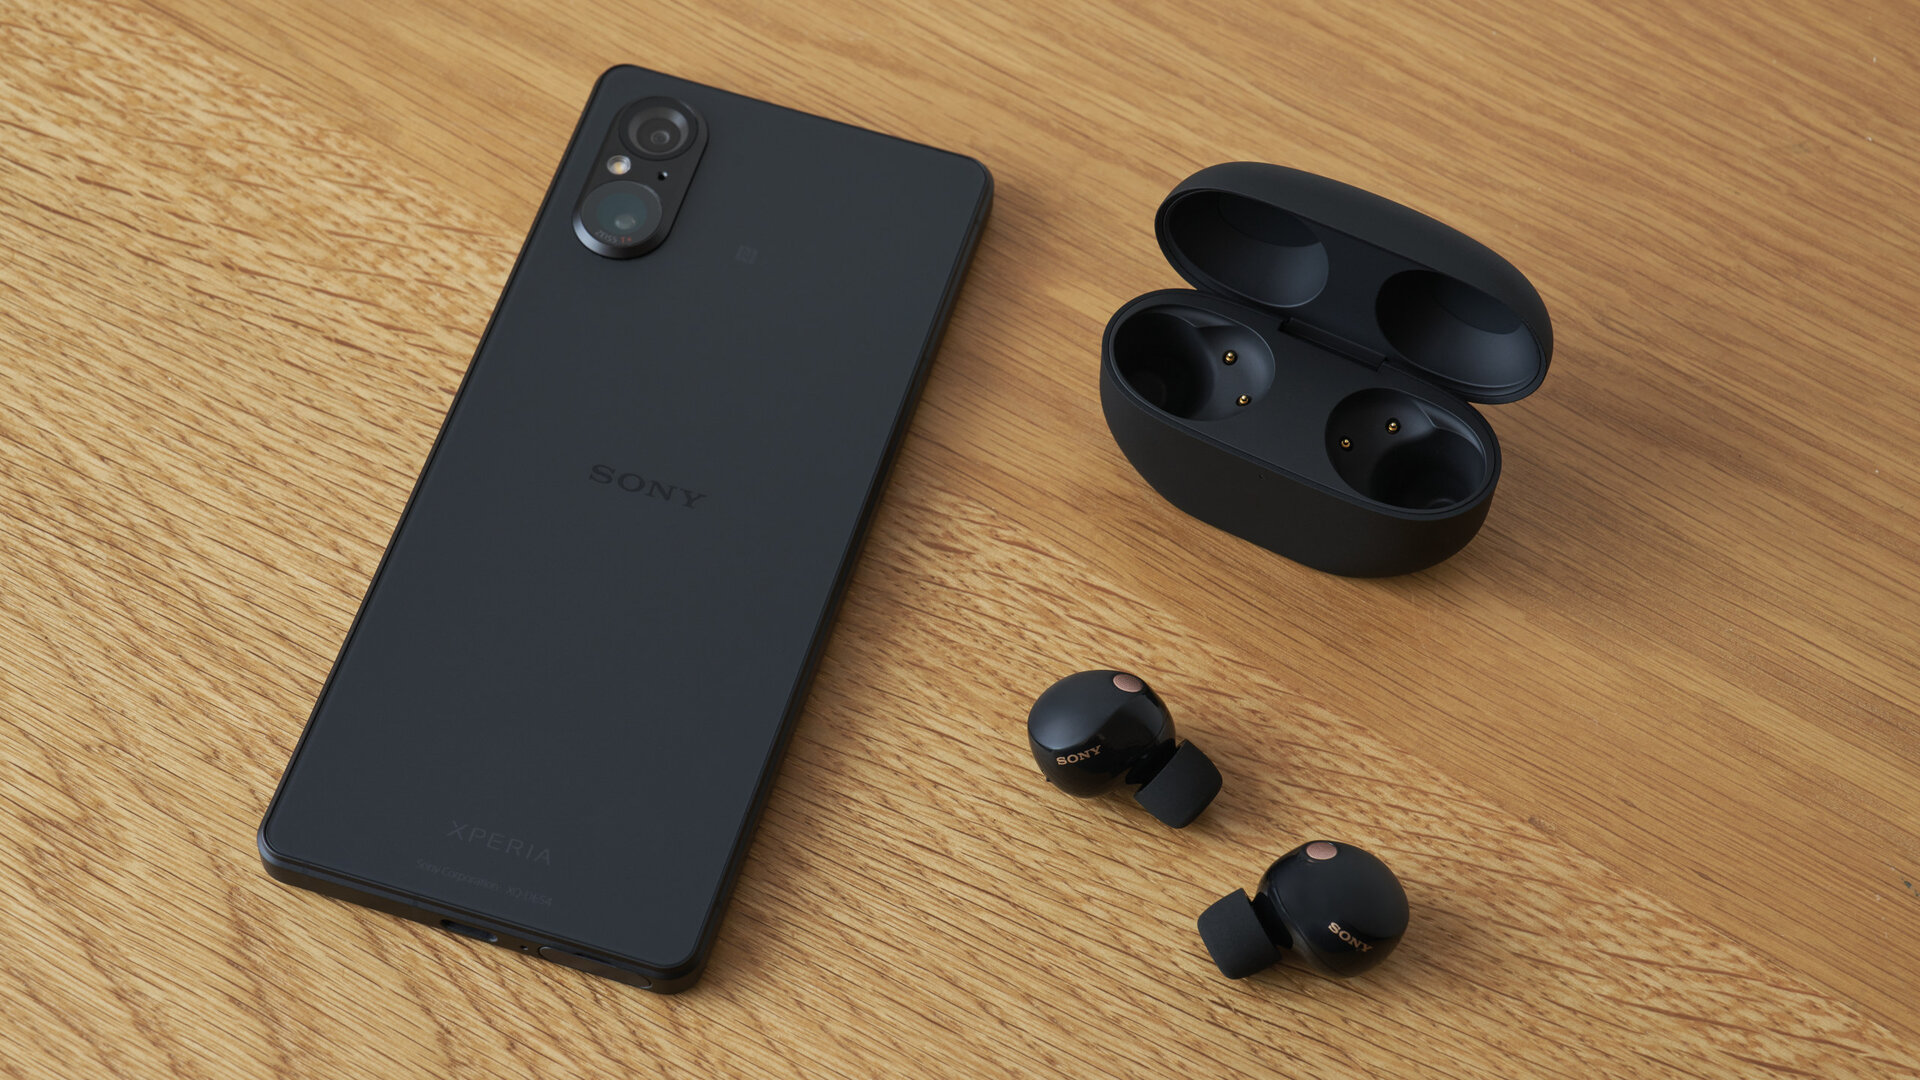 Sony Xperia 5 V with earbuds